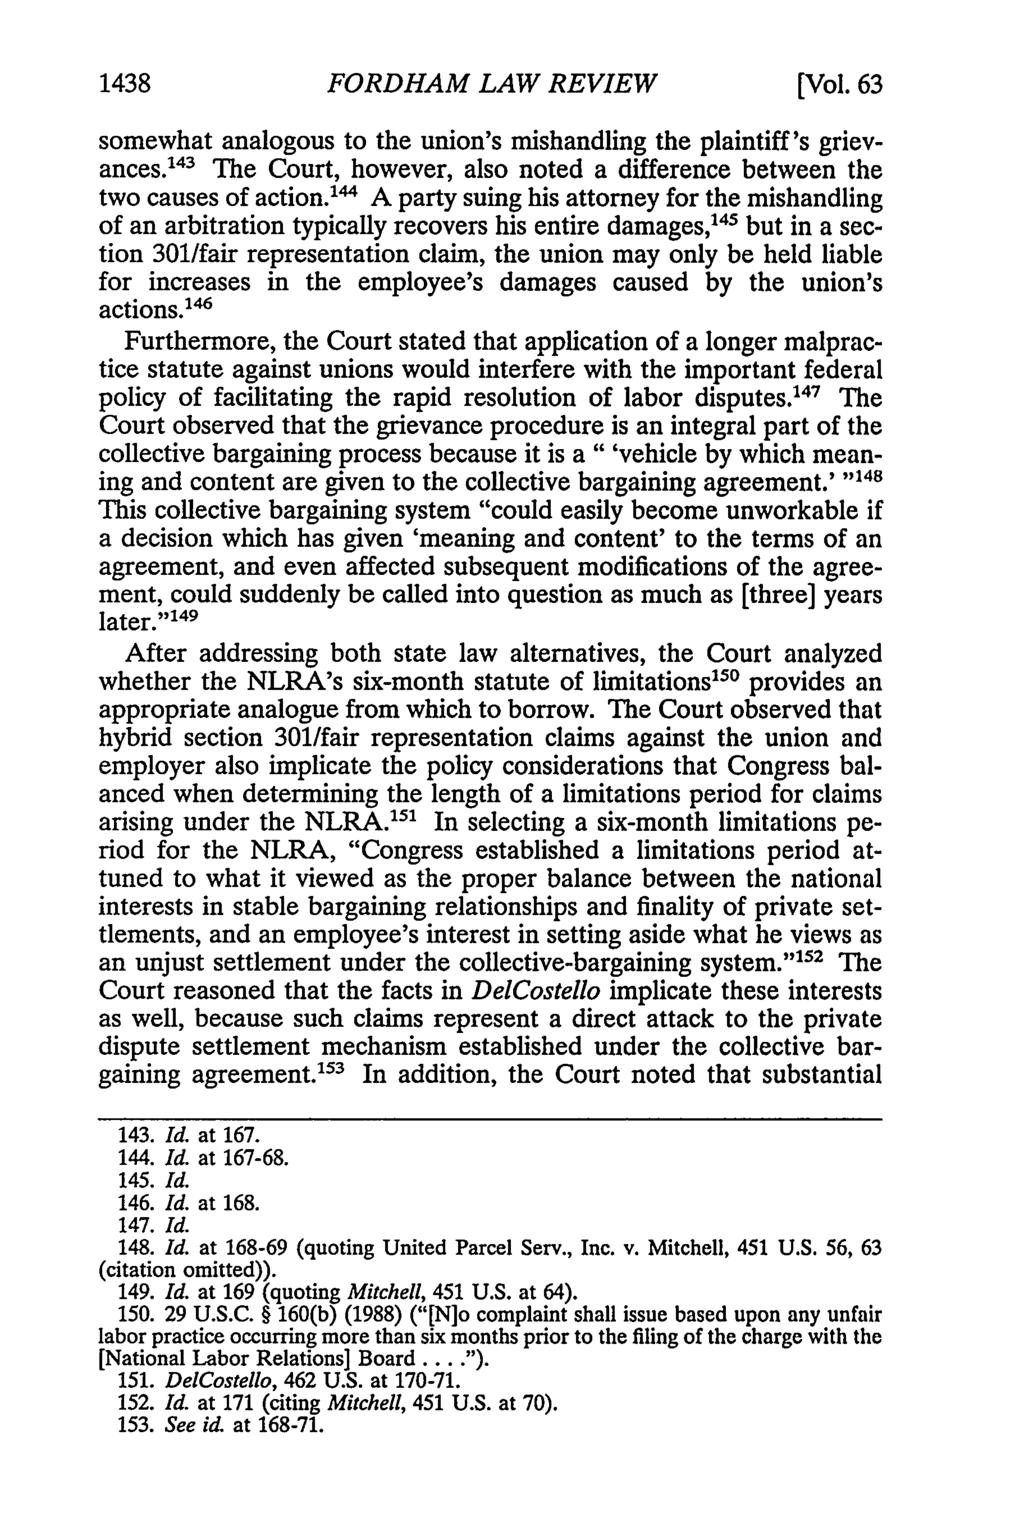 1438 FORDHAM LAW REVIEW [Vol. 63 somewhat analogous to the union's mishandling the plaintiff's grievances. 43 The Court, however, also noted a difference between the two causes of action.